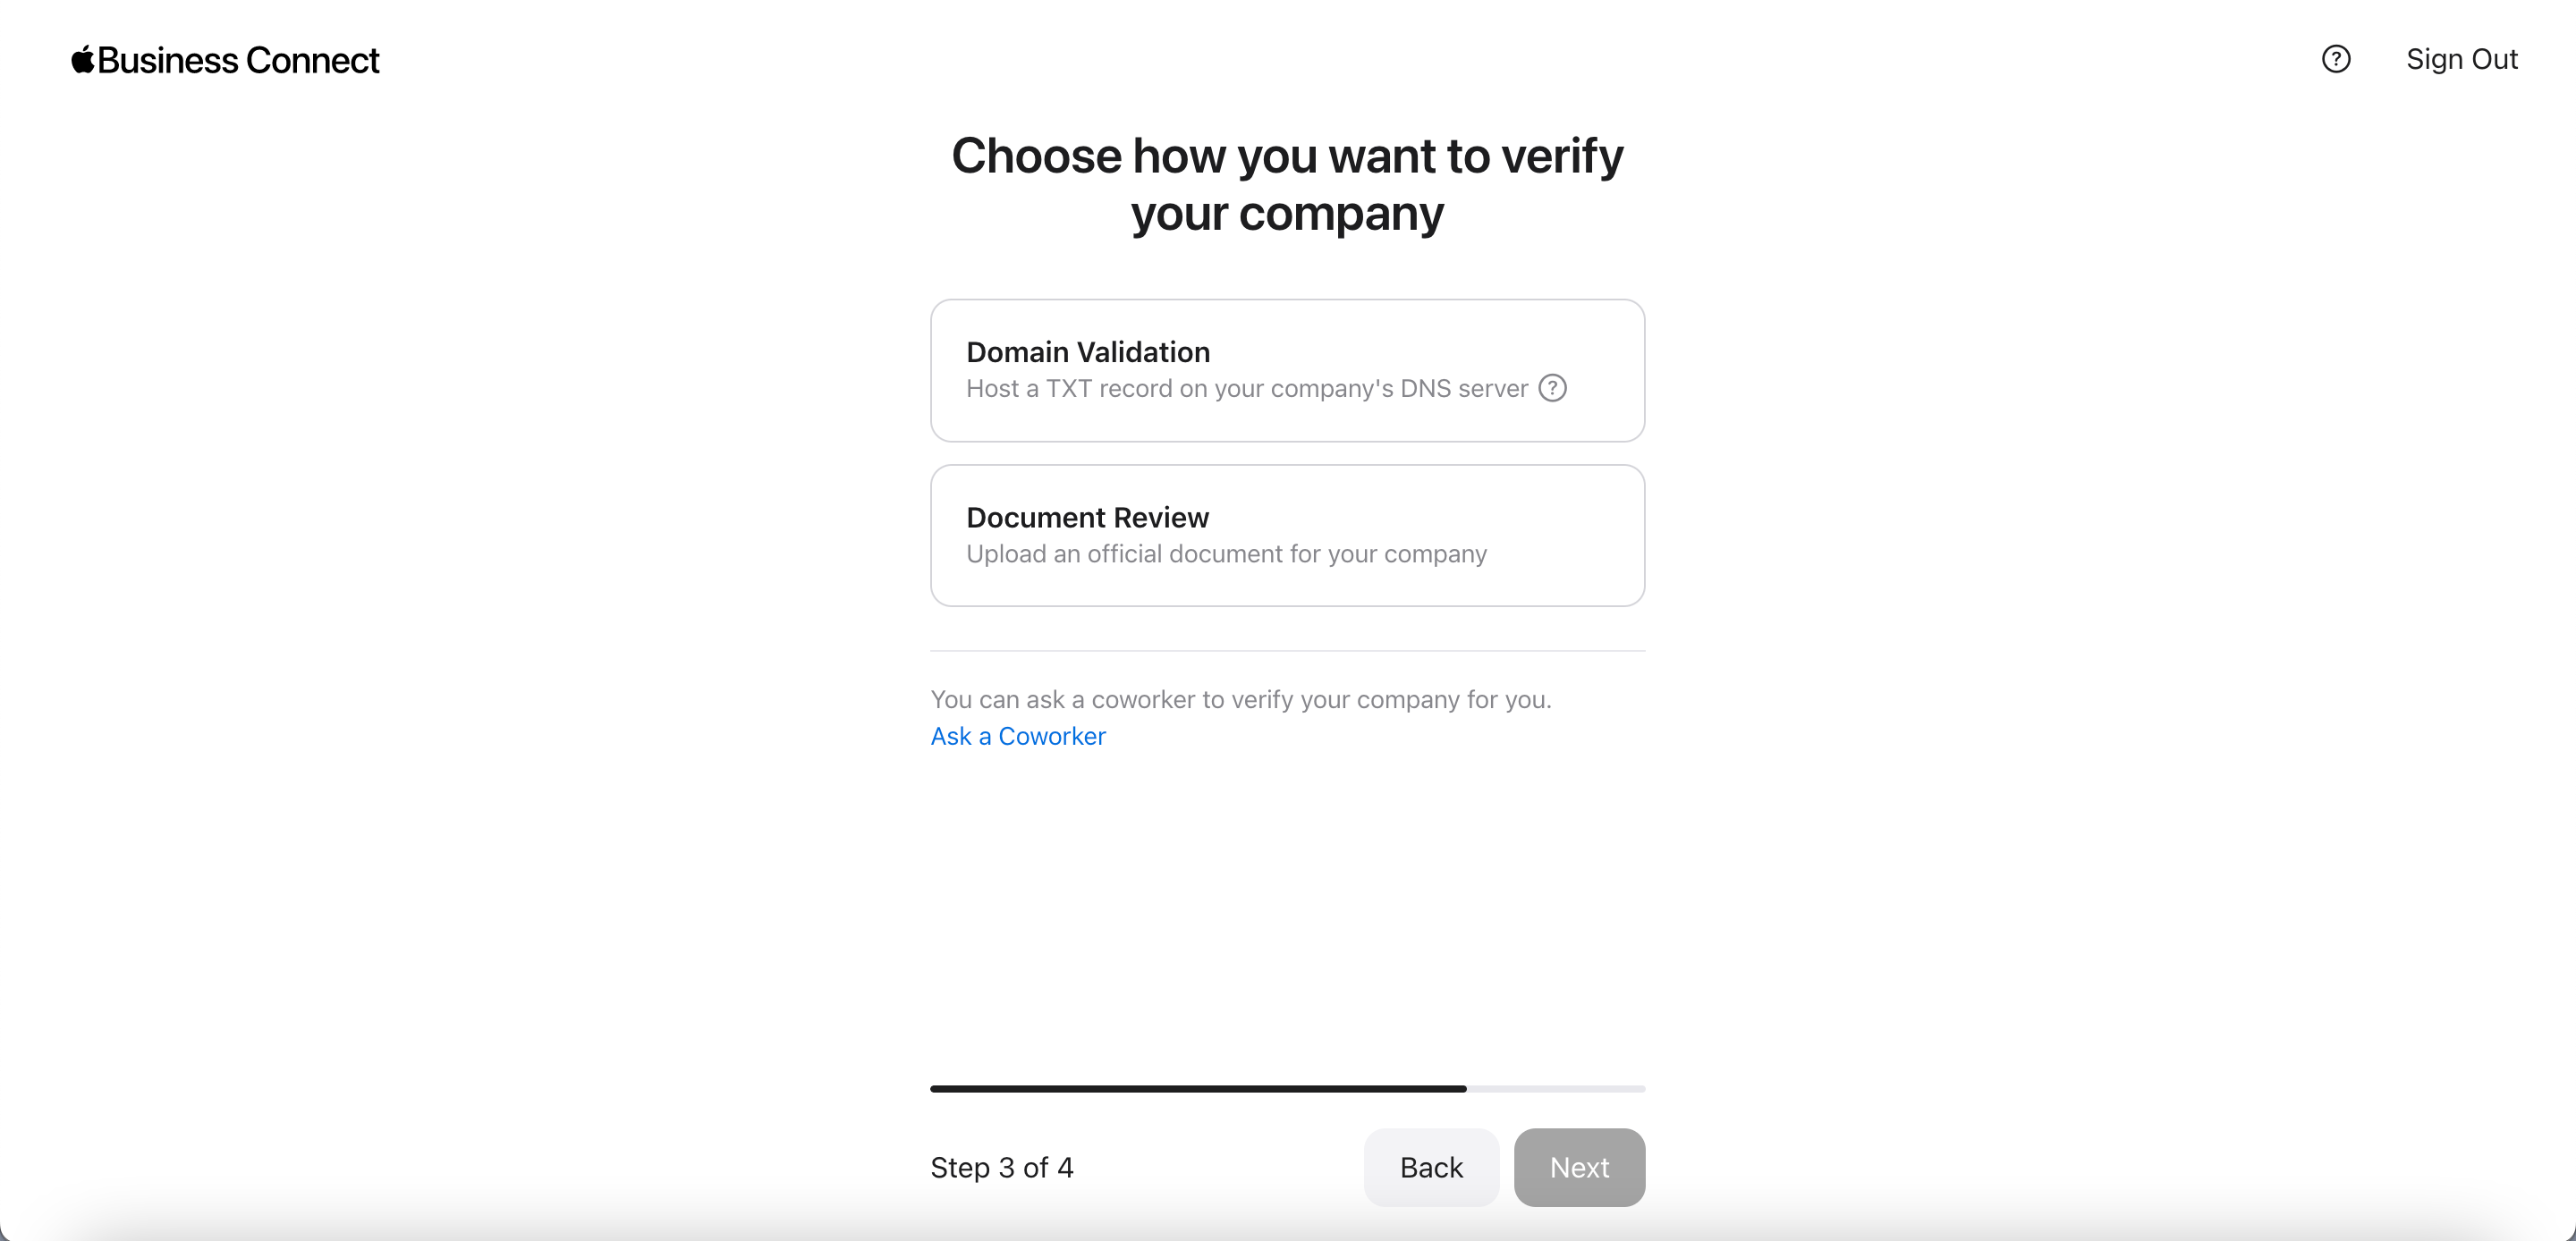 Screenshot of step 3 for Apple Business Connect Enterprise account with choice for how to verify your company via domain validation or document review 